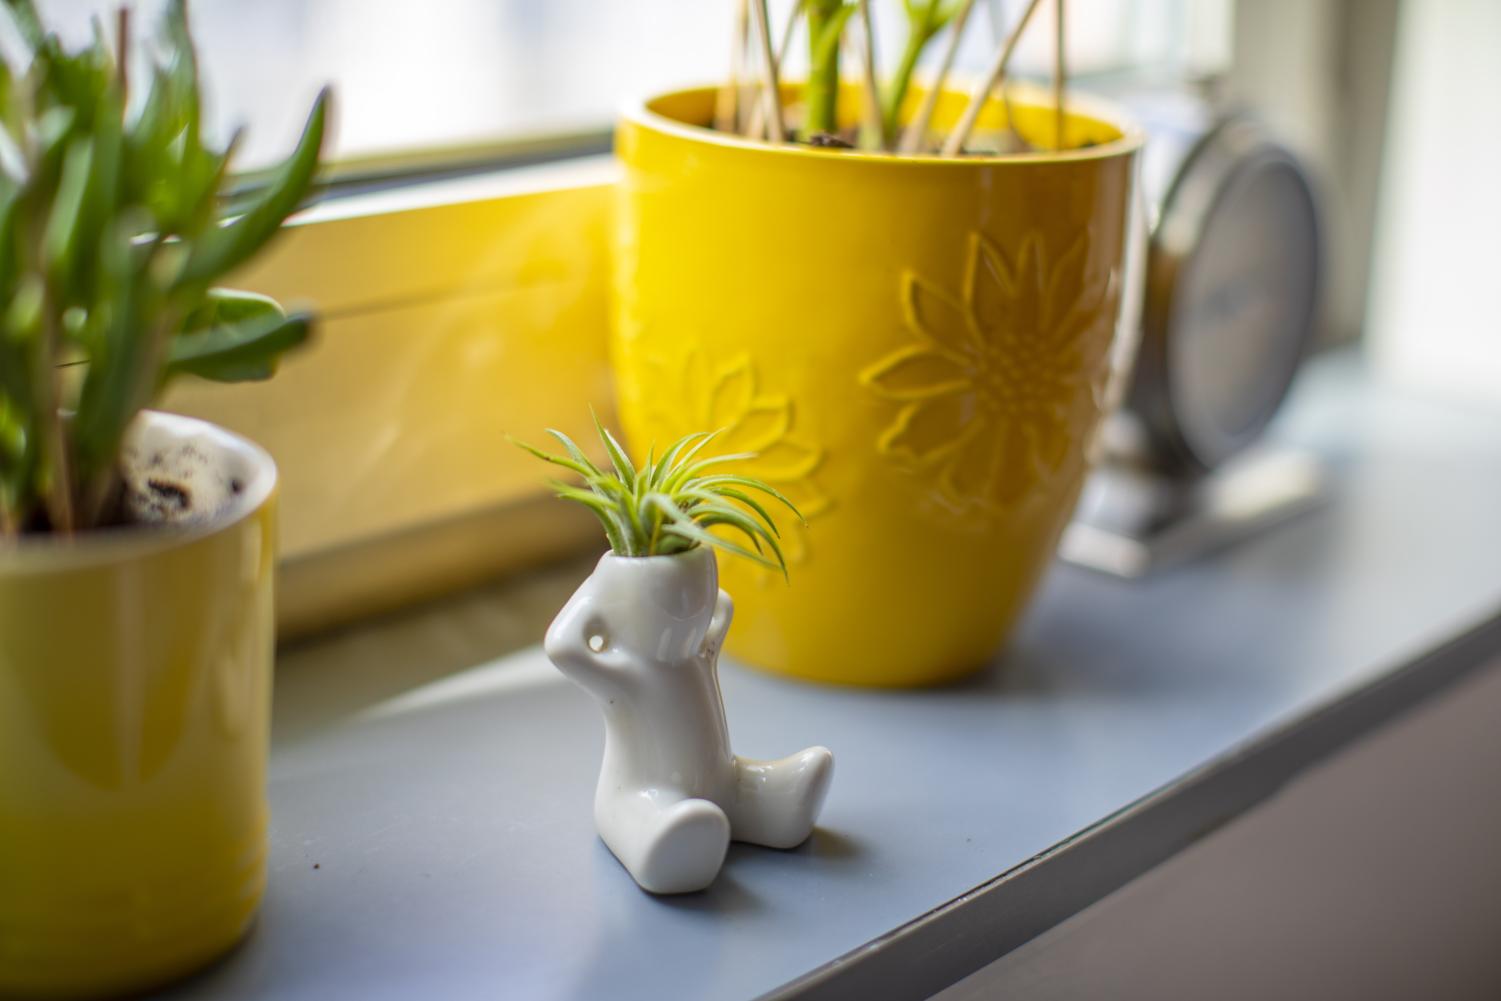 Lily Candelaria has three plants on her windowsill. A yellow plant pot is the centerpiece. A small, white, human-shaped planter holds a tiny air plant.